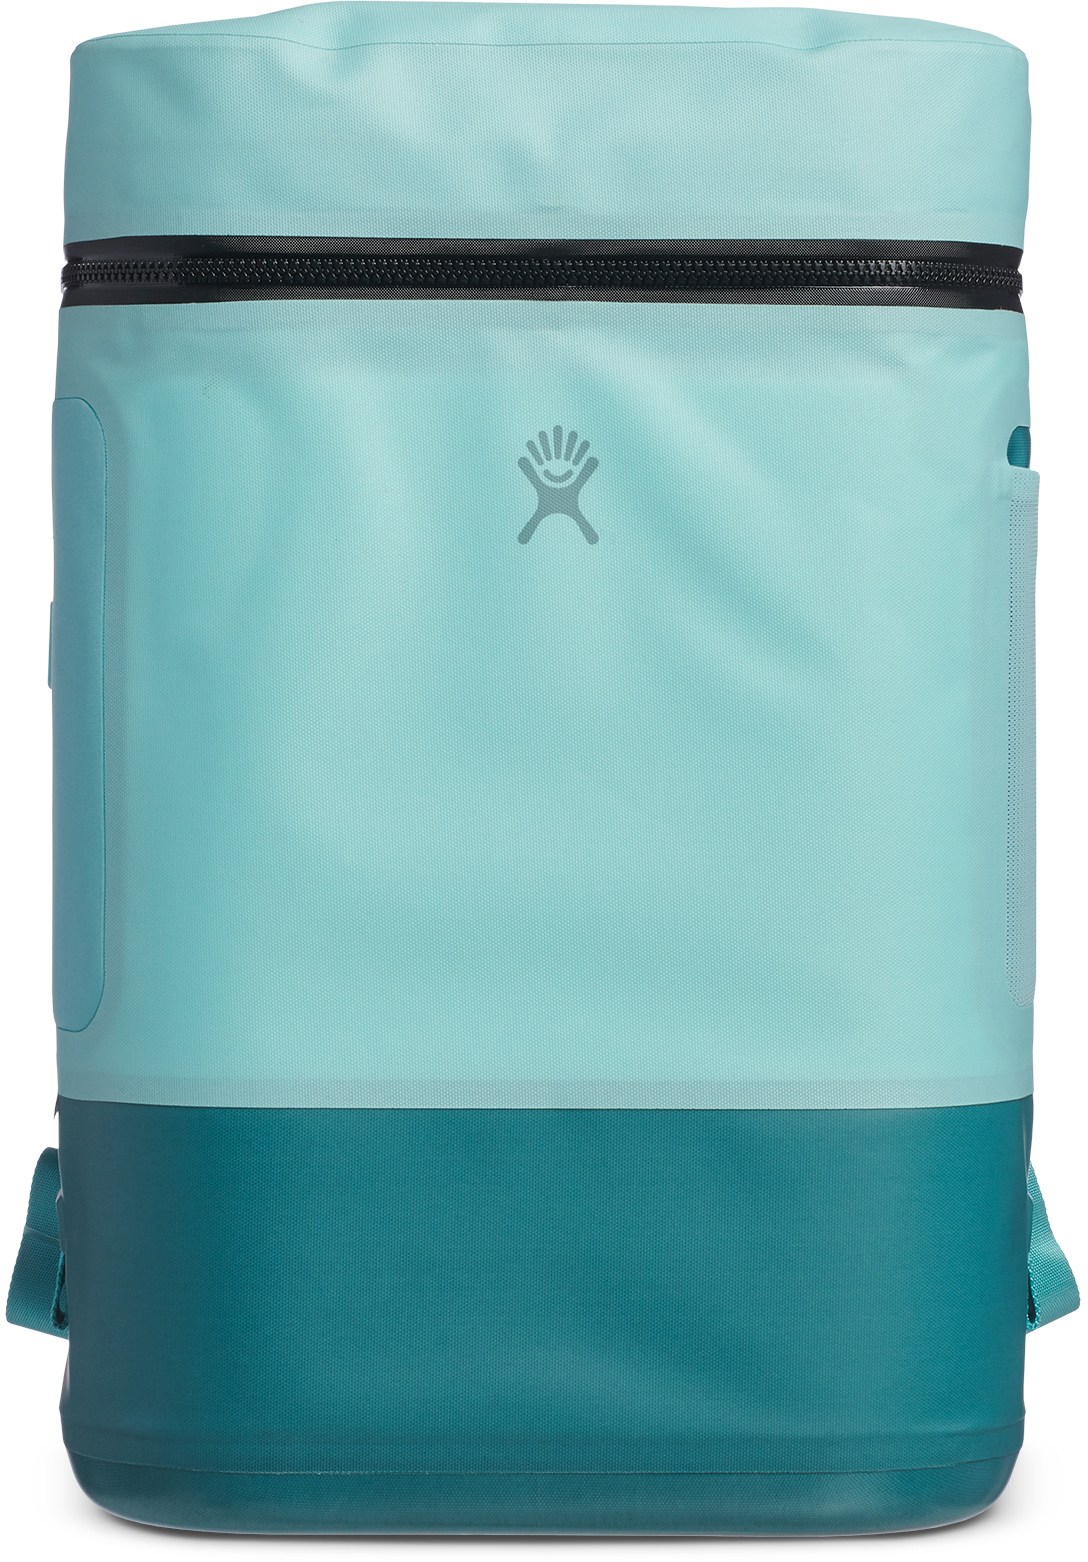 SOFT BACKPACK COOLER FIRST LOOK: Hydro Flask Unbound 22 Liter Portable  Soft-Sided Cooler Review 